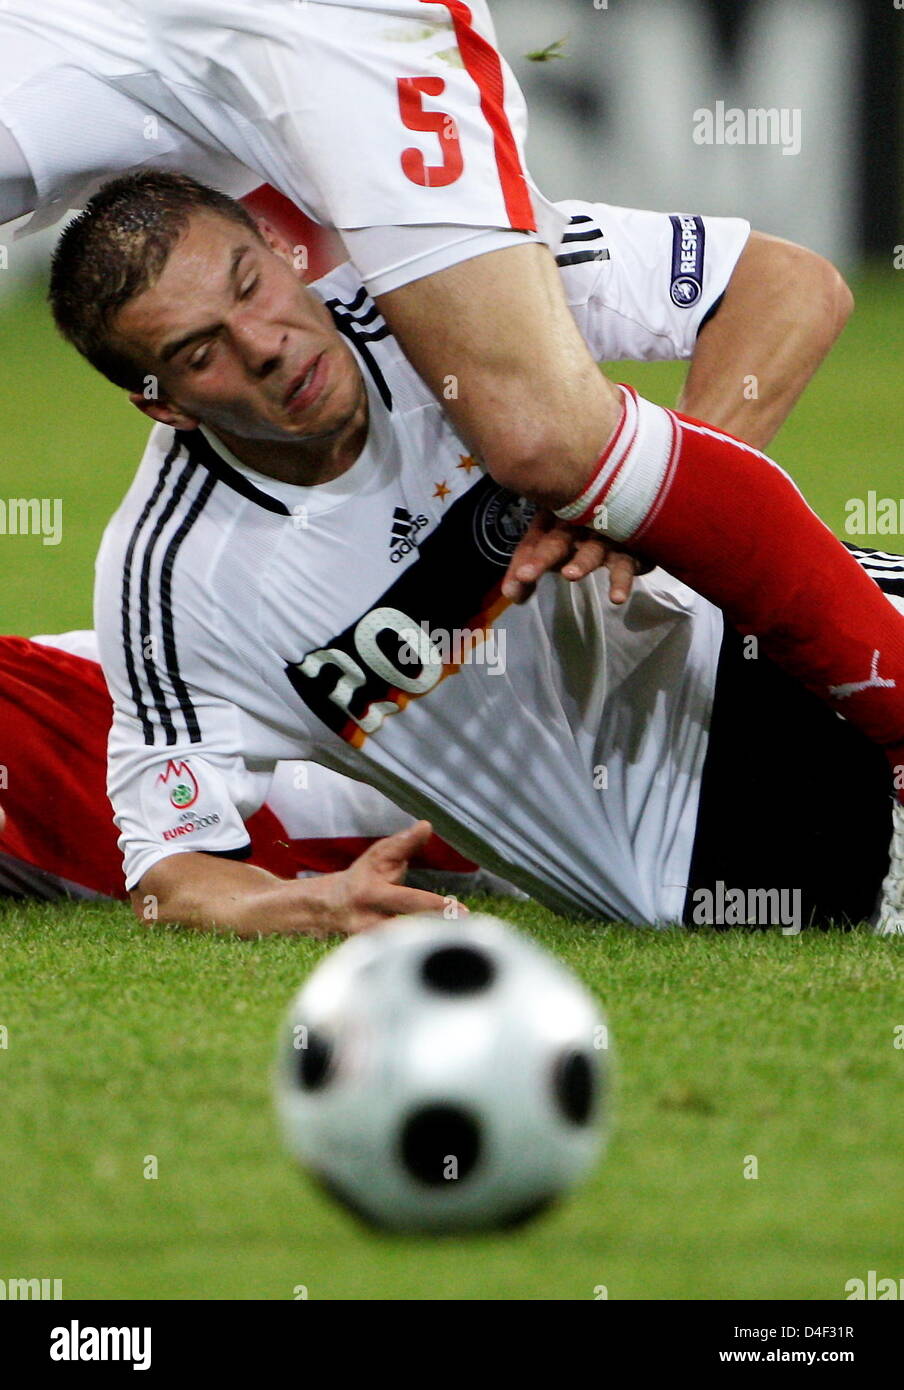 Lukas Podolski (20) of Germany vies with Dariusz Dudka of Poland during the EURO 2008 preliminary round group B match in Woerthersee Stadium, Klagenfurt, Austria, 08 June 2008. Photo: Oliver Berg dpa +please note UEFA restrictions particularly in regard to slide shows and 'No Mobile Services'+ +++(c) dpa - Bildfunk+++ Stock Photo